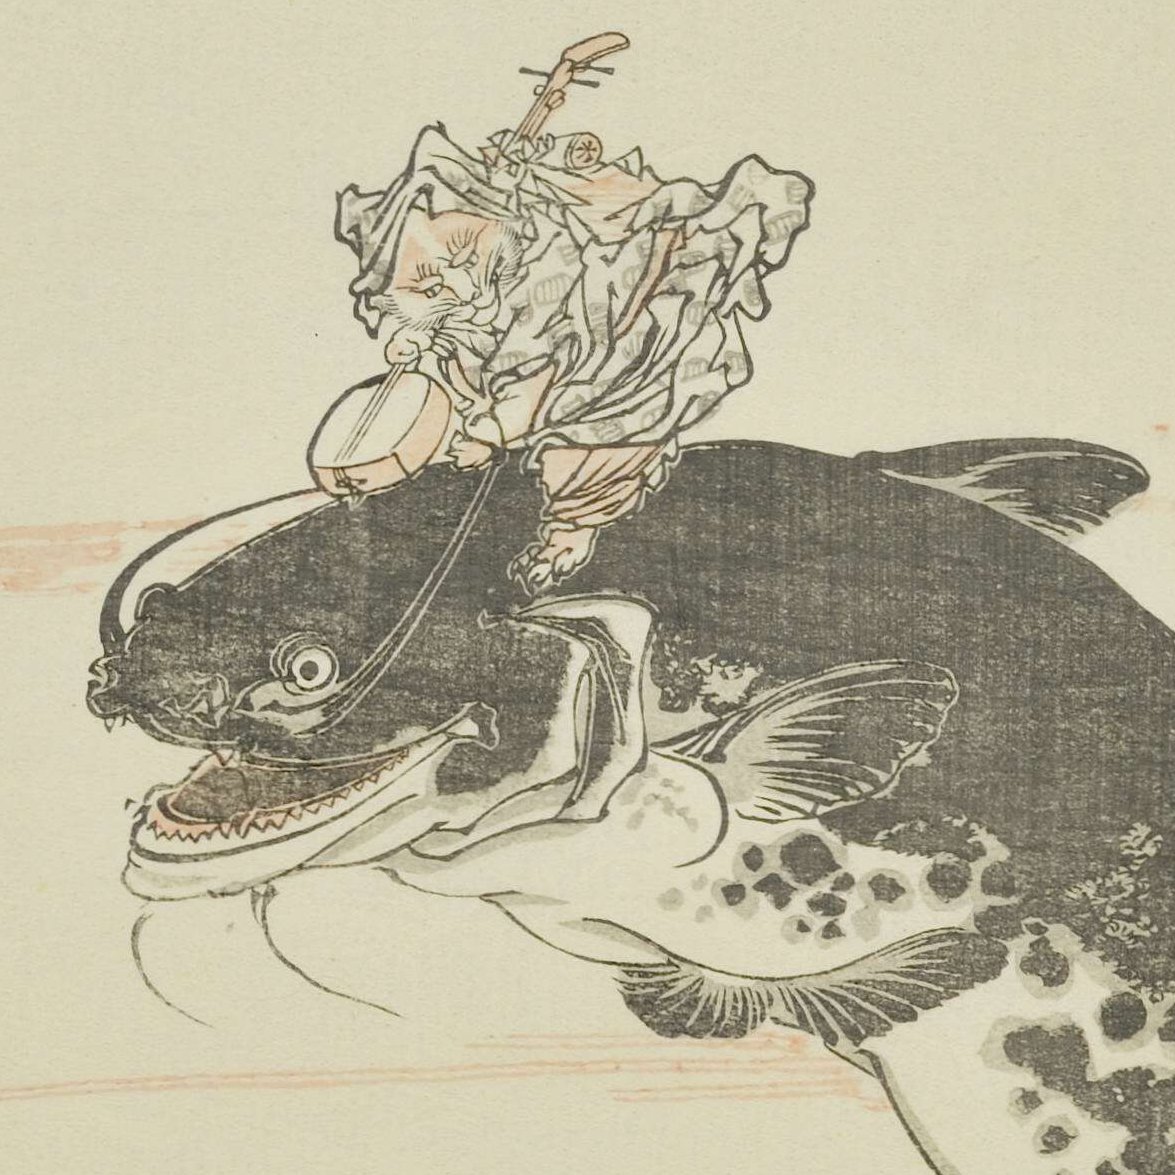 Kyosai's catfish : the catfish image is derived from a myth that explains the origins of earthquakes as the movement of a giant catfish 
#superstitiology #DailyFolklore #ofdarkandmacabre #villageofstrange #Occult #witchcraft #woodblockprints #ukiyo_e #ukiyoeart #ukiyoeheroes